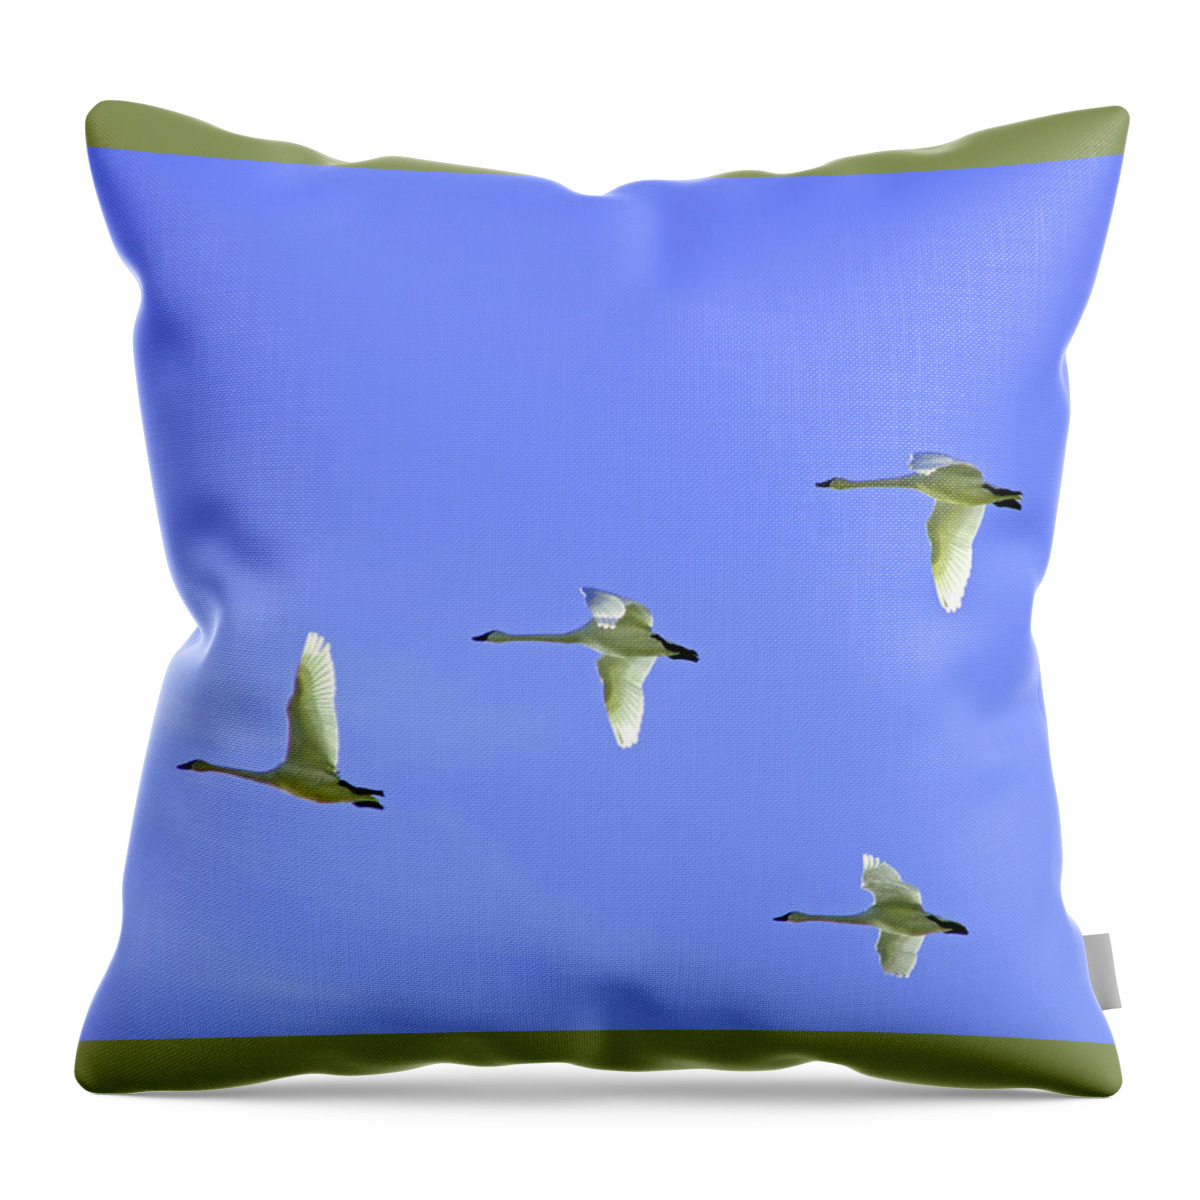 Snowy Egrets Flying In Klanth Wildlife Refuge In California Throw Pillow featuring the photograph Snowy Egrets by Dr Janine Williams